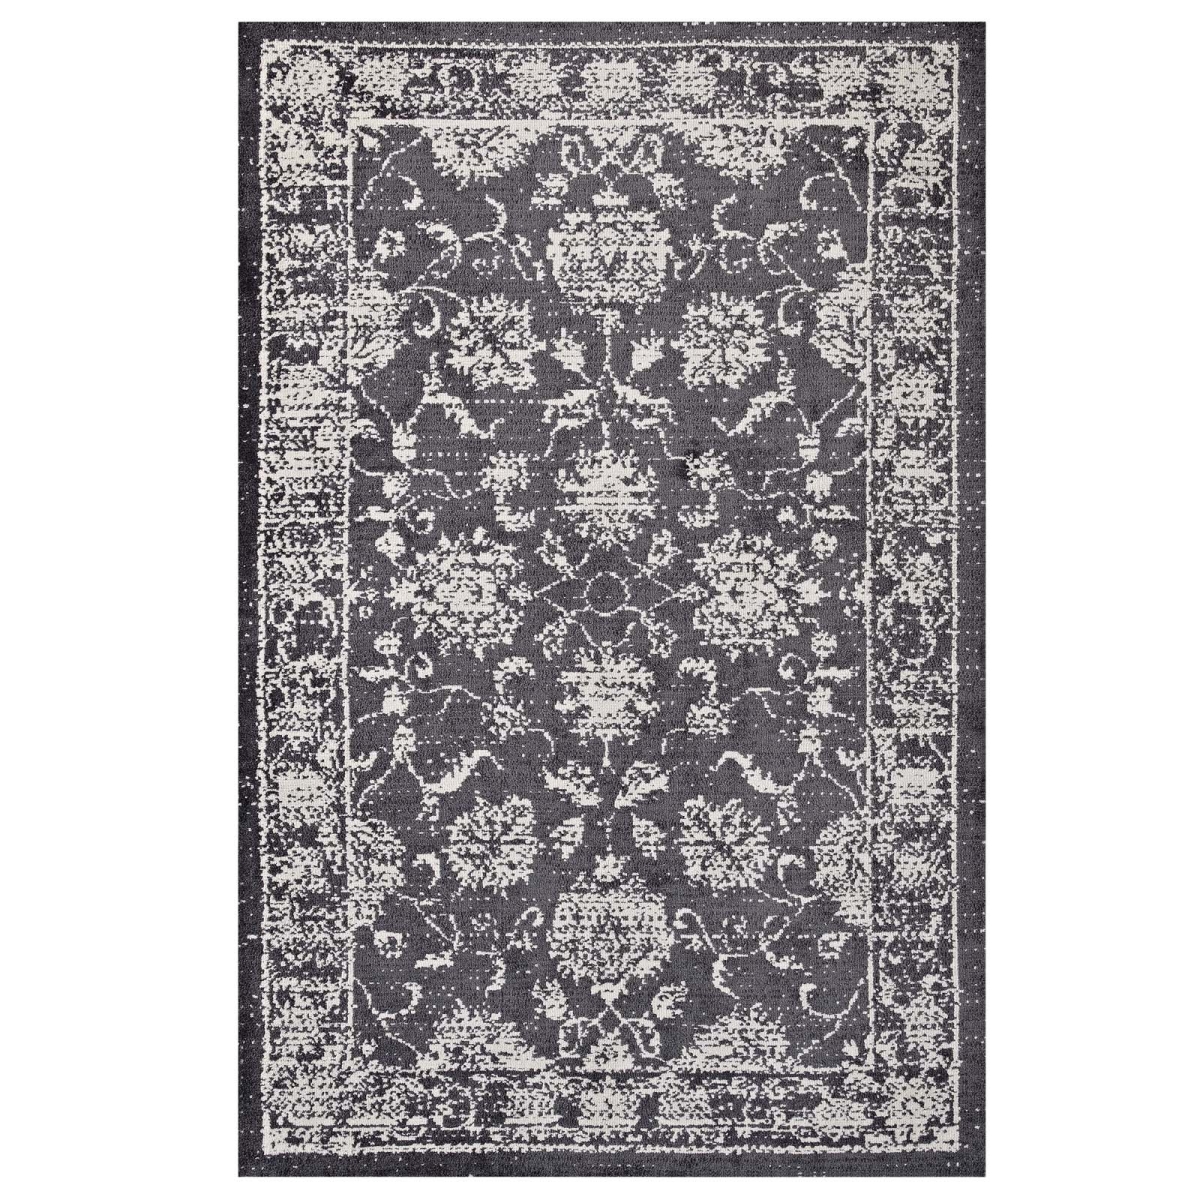 R-1020a-58 5 X 8 Ft. Kazia Distressed Floral Lattice Polyester Area Rug - Dark Gray & Ivory, 0.5 X 60 X 96 In.